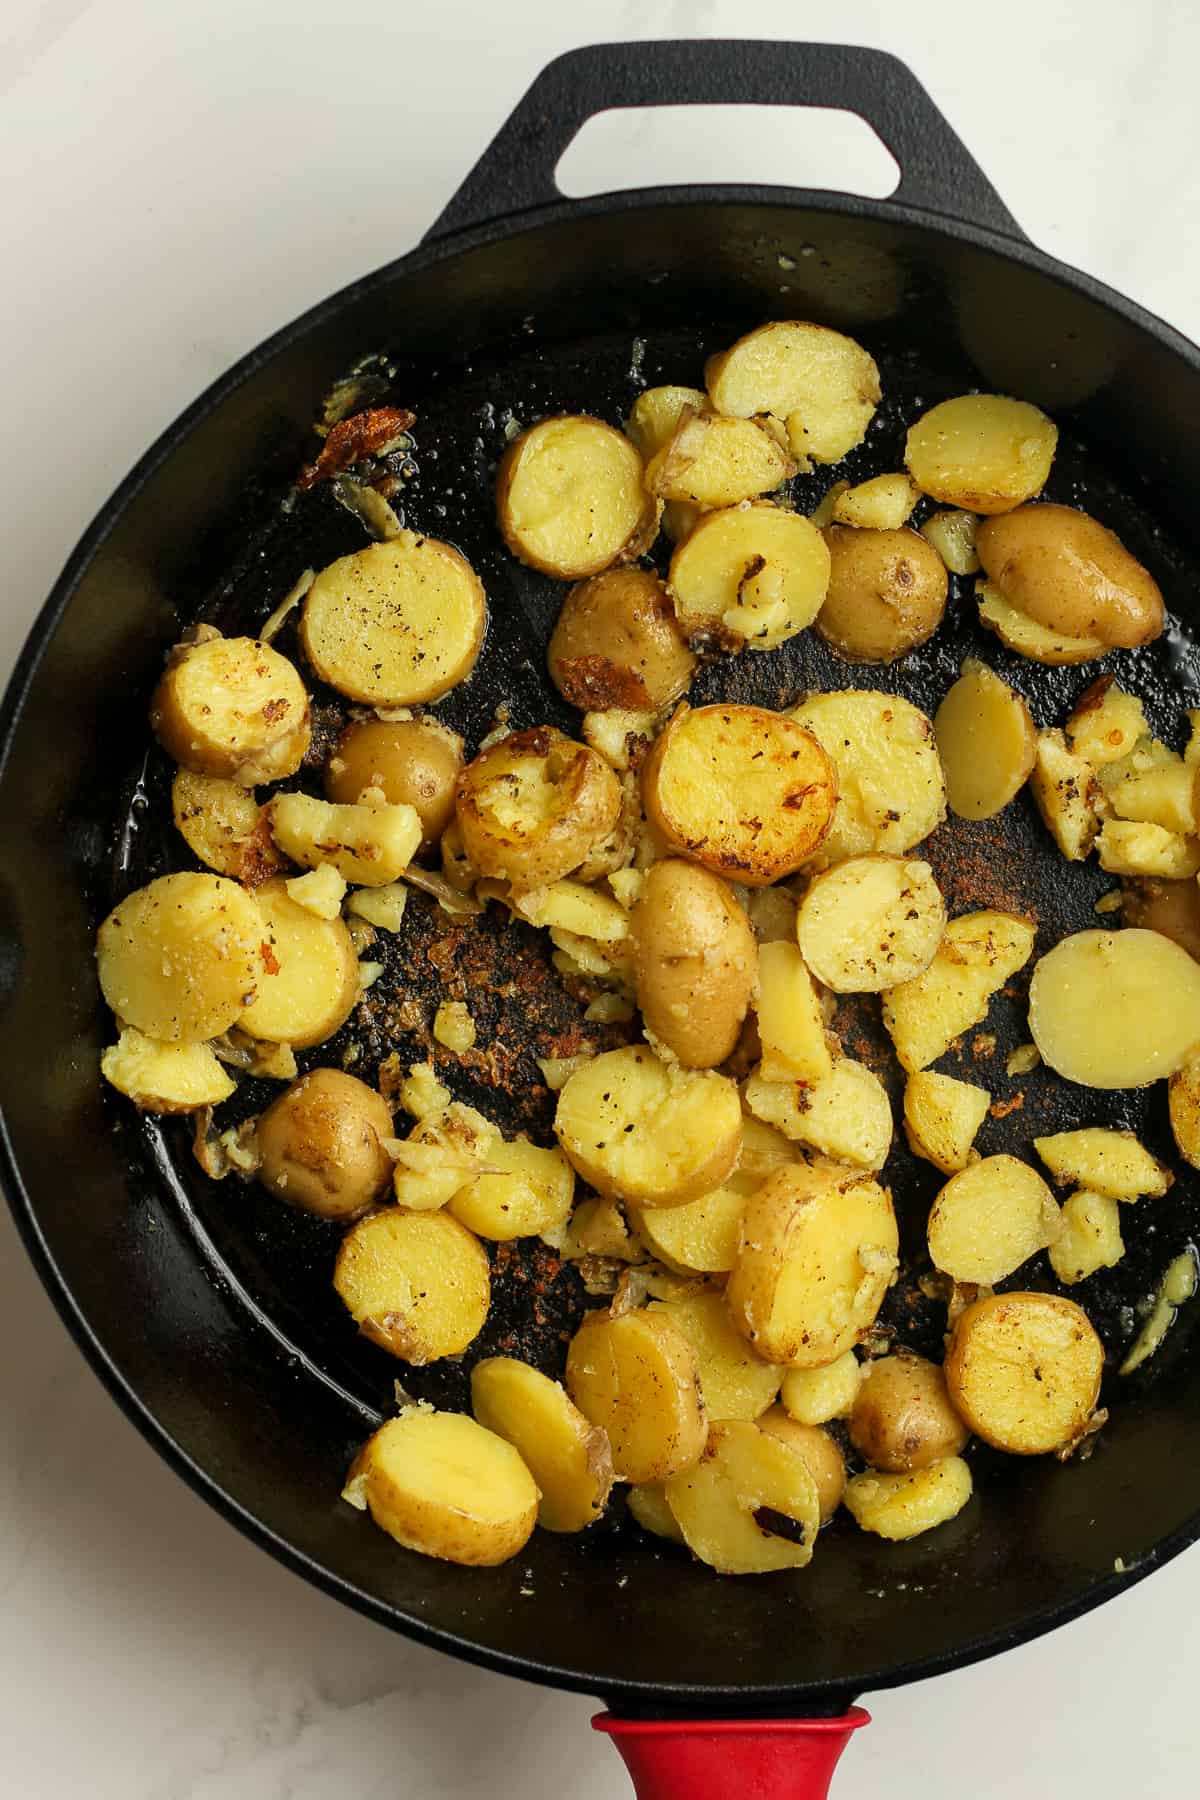 The skillet with the cooked yellow potatoes.